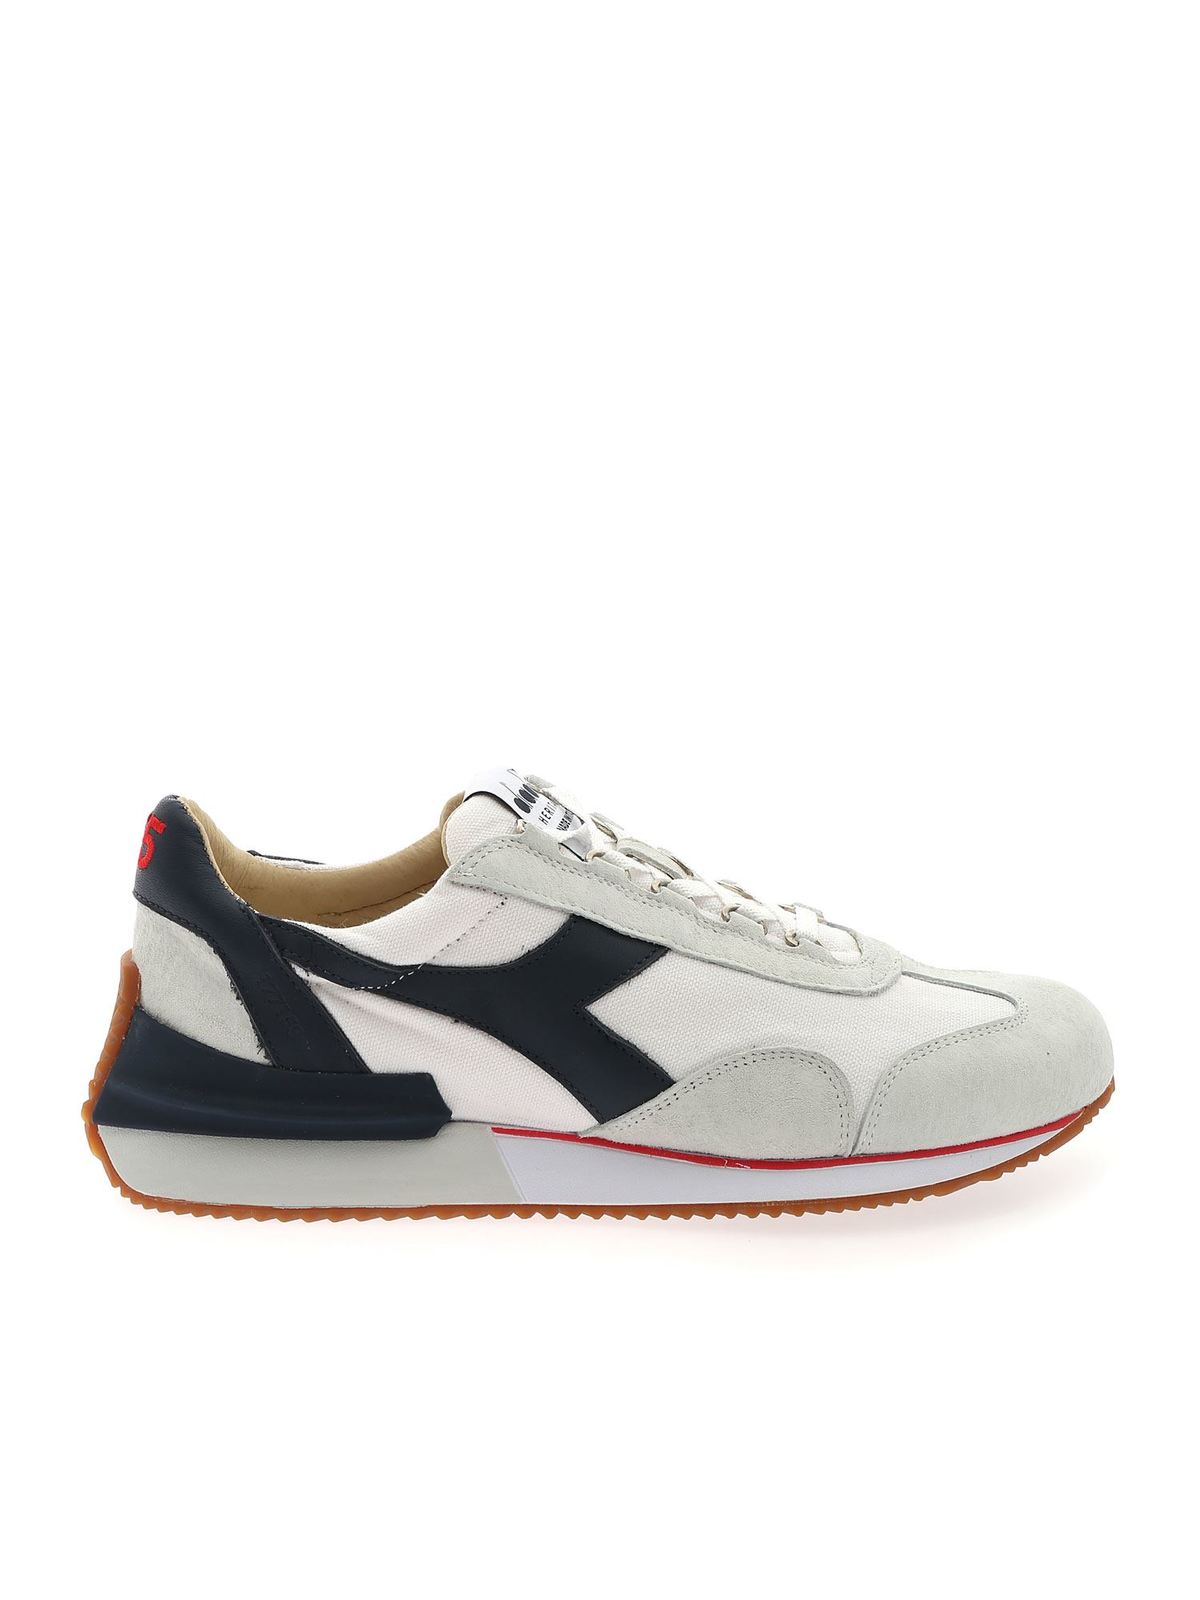 Trainers Diadora Heritage - Equipe Mad sneakers in white and blue ...